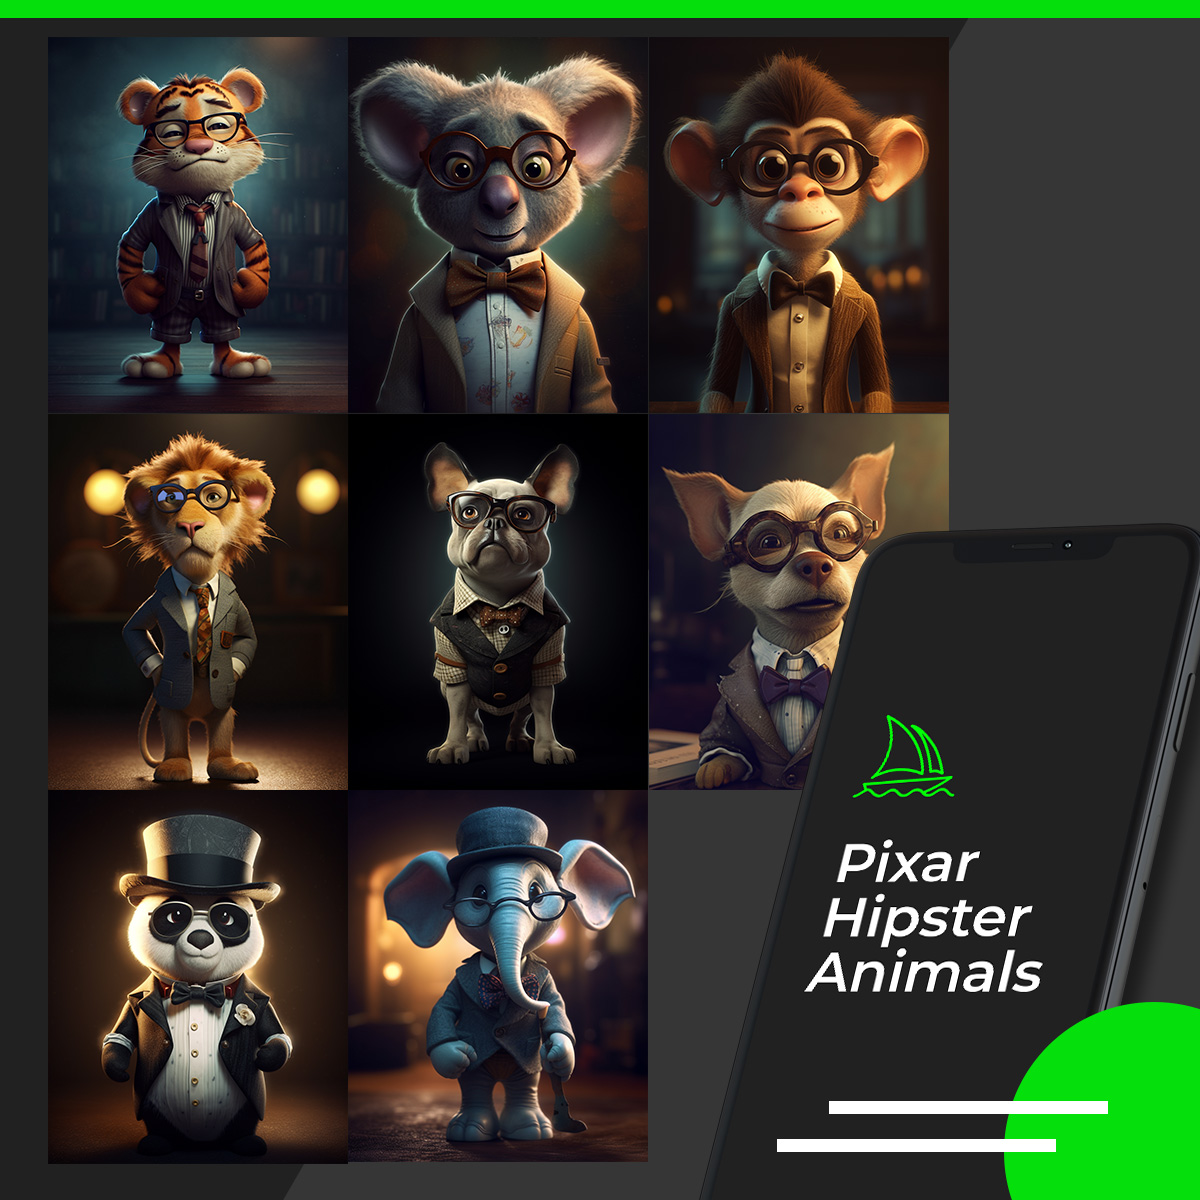 Pixar Hipster Animals Prompt cover image.